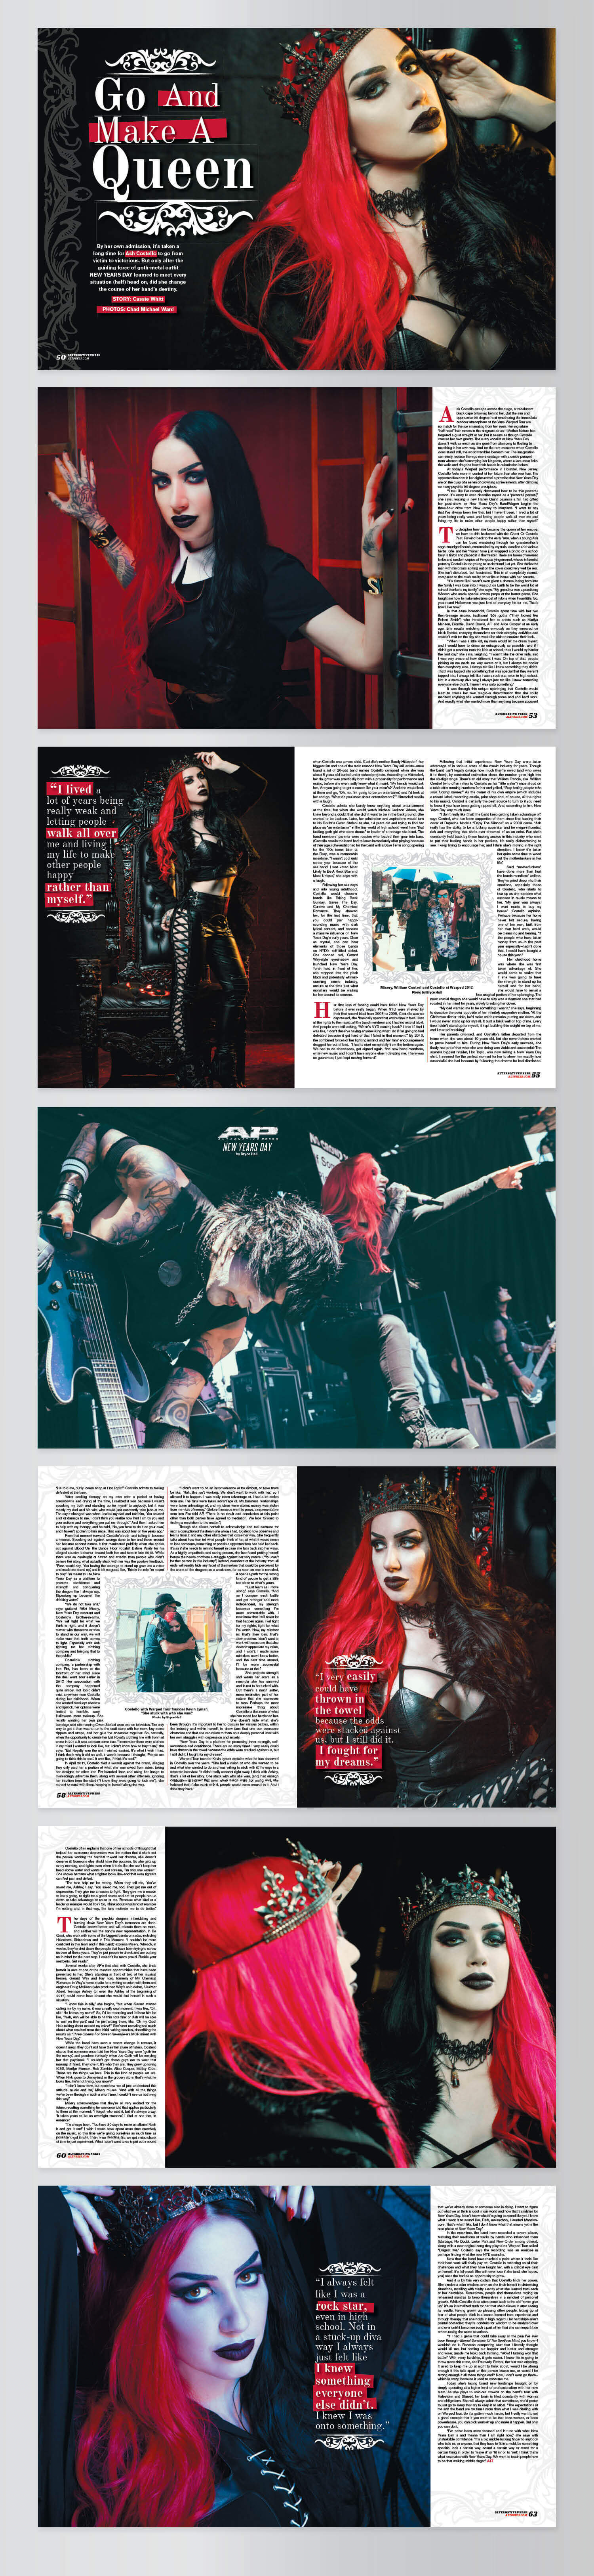 Ash Costello Cover Story